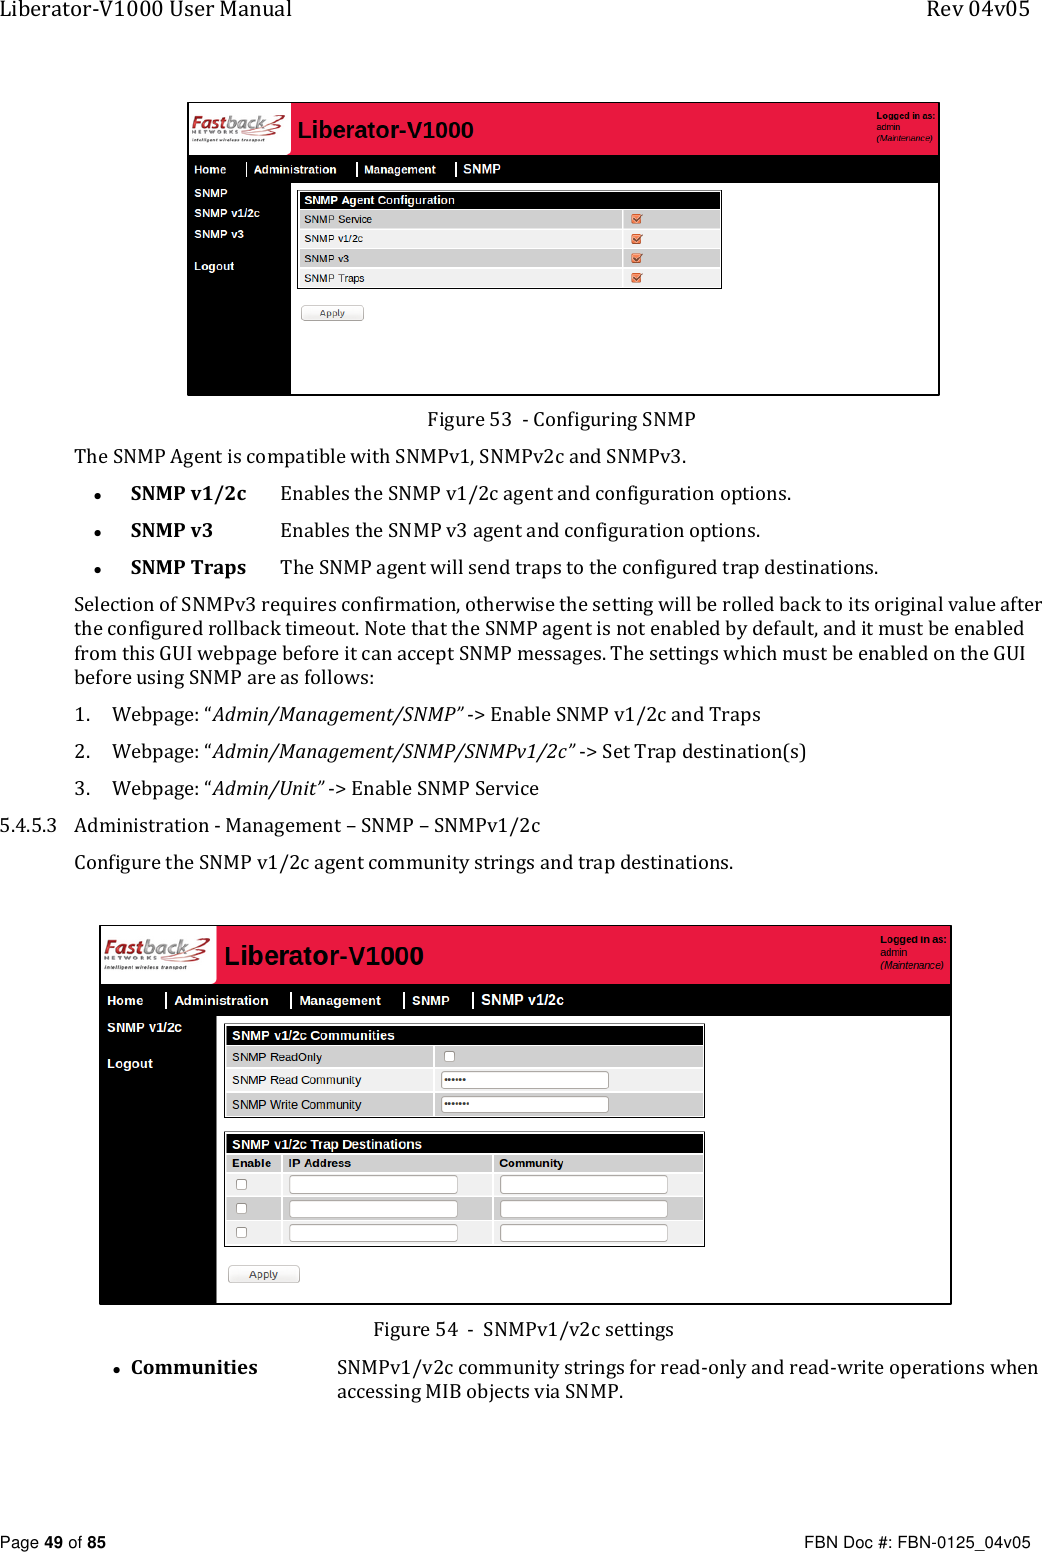 Liberator-V1000 User Manual  Rev 04v05     Page 49 of 85   FBN Doc #: FBN-0125_04v05  Figure 53  - Configuring SNMP The SNMP Agent is compatible with SNMPv1, SNMPv2c and SNMPv3. • SNMP v1/2c   Enables the SNMP v1/2c agent and configuration options. • SNMP v3  Enables the SNMP v3 agent and configuration options. • SNMP Traps  The SNMP agent will send traps to the configured trap destinations. Selection of SNMPv3 requires confirmation, otherwise the setting will be rolled back to its original value after the configured rollback timeout. Note that the SNMP agent is not enabled by default, and it must be enabled from this GUI webpage before it can accept SNMP messages. The settings which must be enabled on the GUI before using SNMP are as follows: 1. Webpage: “Admin/Management/SNMP” -&gt; Enable SNMP v1/2c and Traps 2. Webpage: “Admin/Management/SNMP/SNMPv1/2c” -&gt; Set Trap destination(s) 3. Webpage: “Admin/Unit” -&gt; Enable SNMP Service 5.4.5.3 Administration - Management – SNMP – SNMPv1/2c Configure the SNMP v1/2c agent community strings and trap destinations.    Figure 54  -  SNMPv1/v2c settings • Communities   SNMPv1/v2c community strings for read-only and read-write operations when accessing MIB objects via SNMP. 